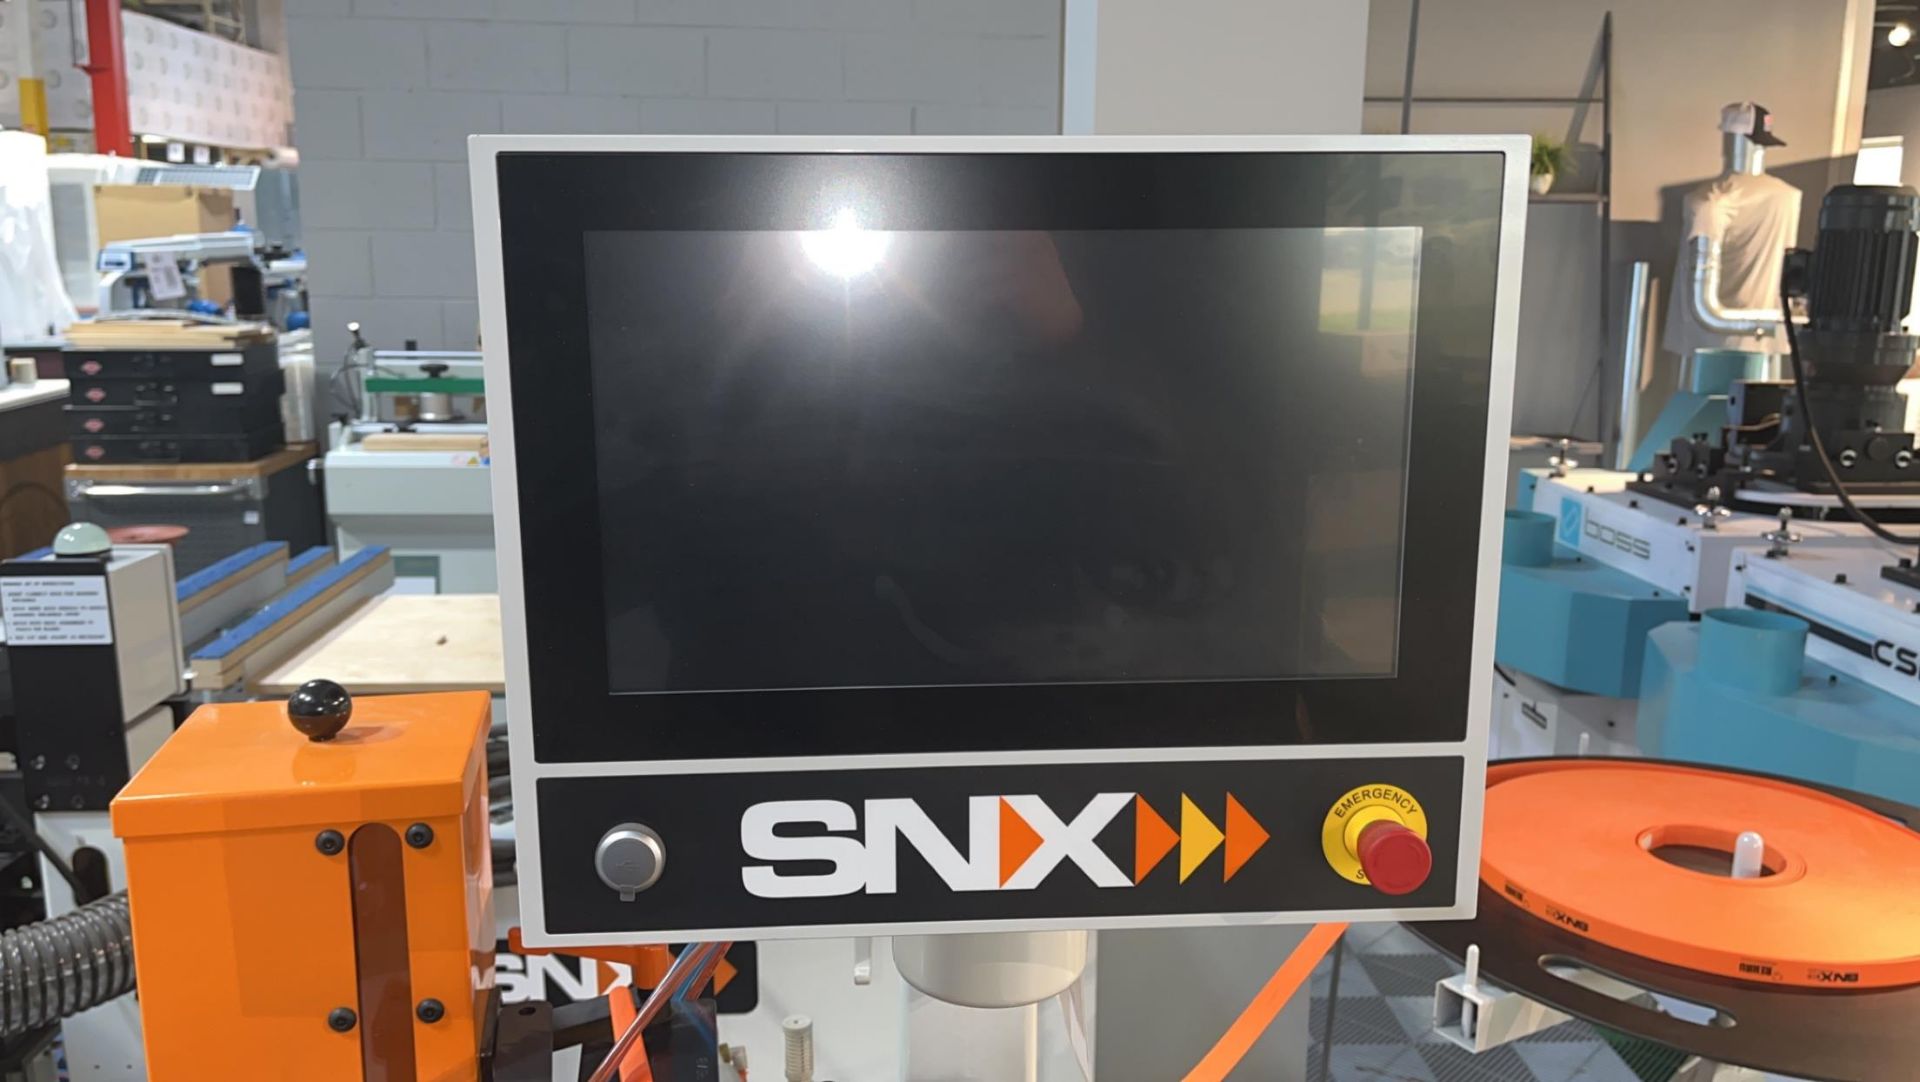 SNX nVision G1 Contour Edgebander - Image 19 of 21